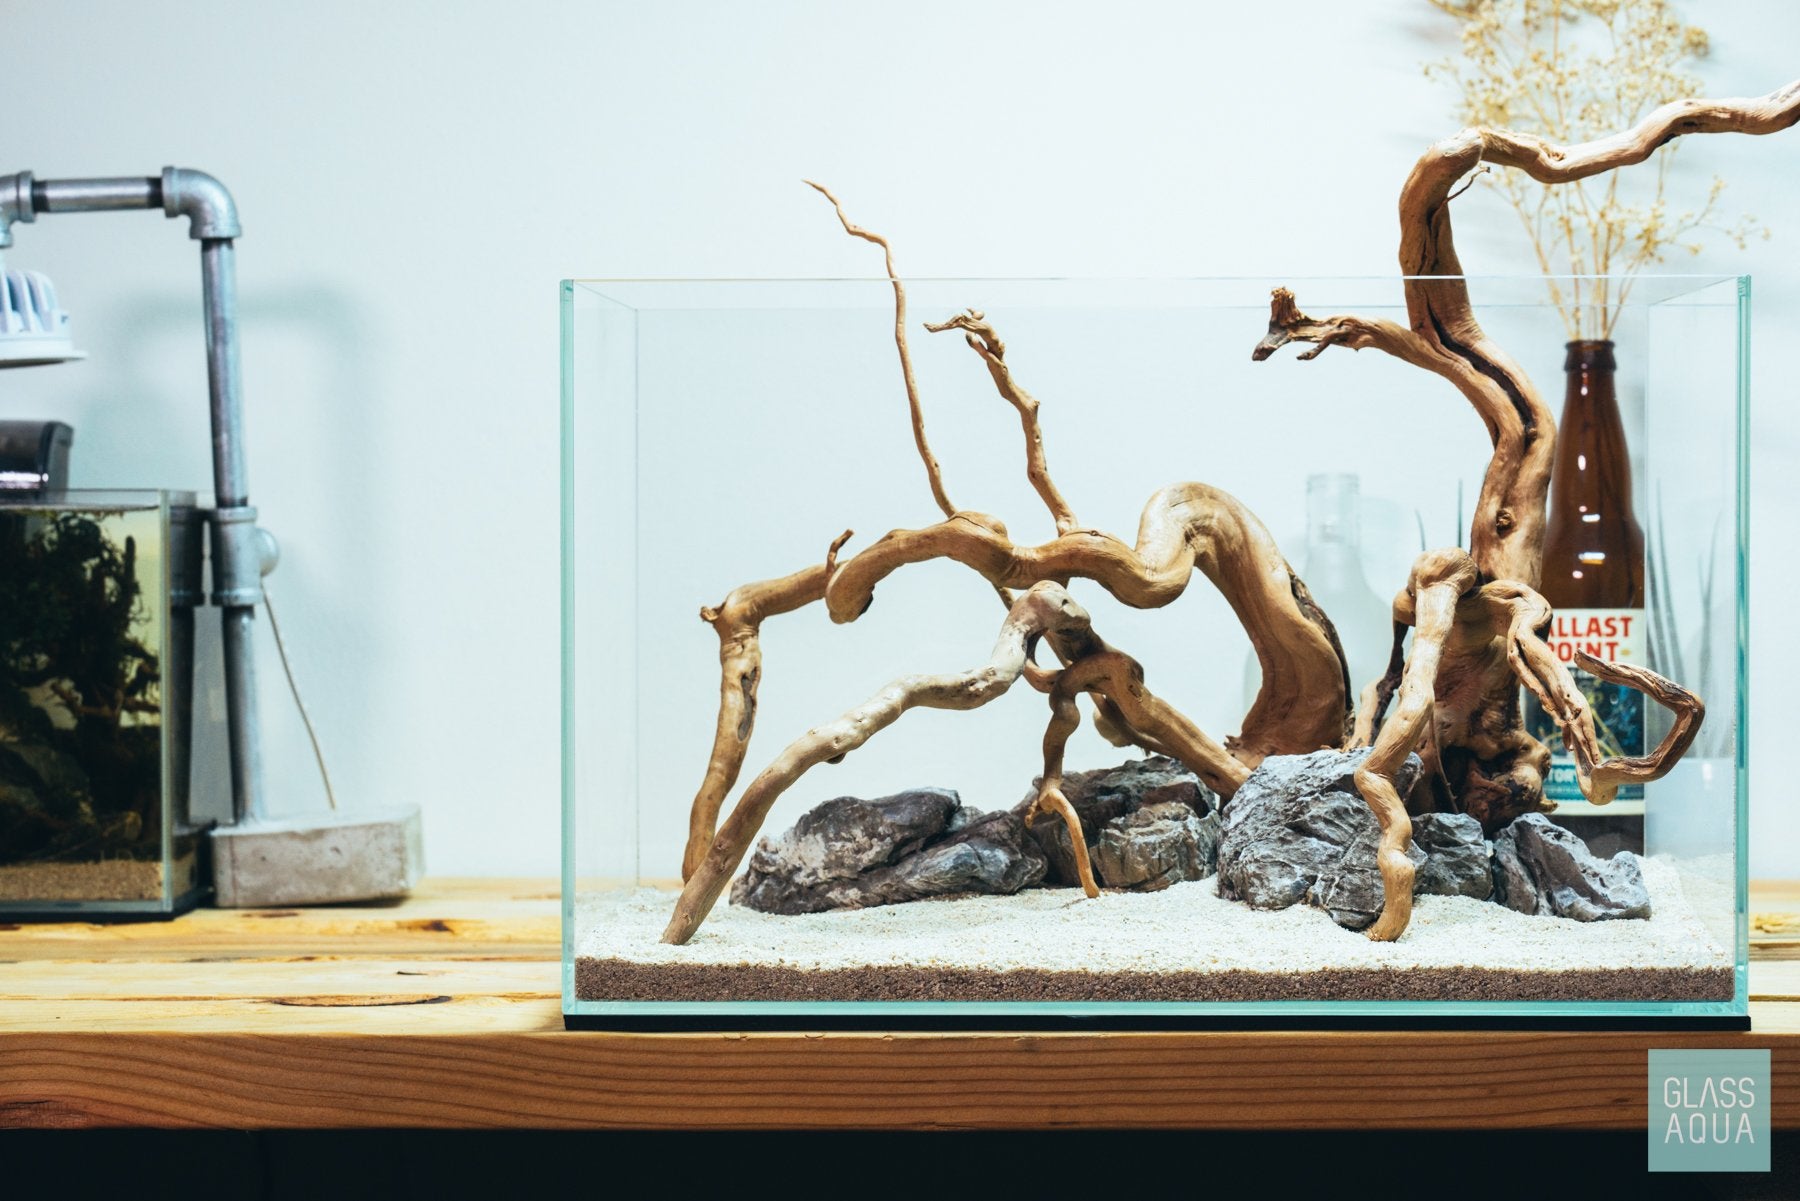 Spiderwood in the Aquarium: A Stunning Addition for Aquascaping